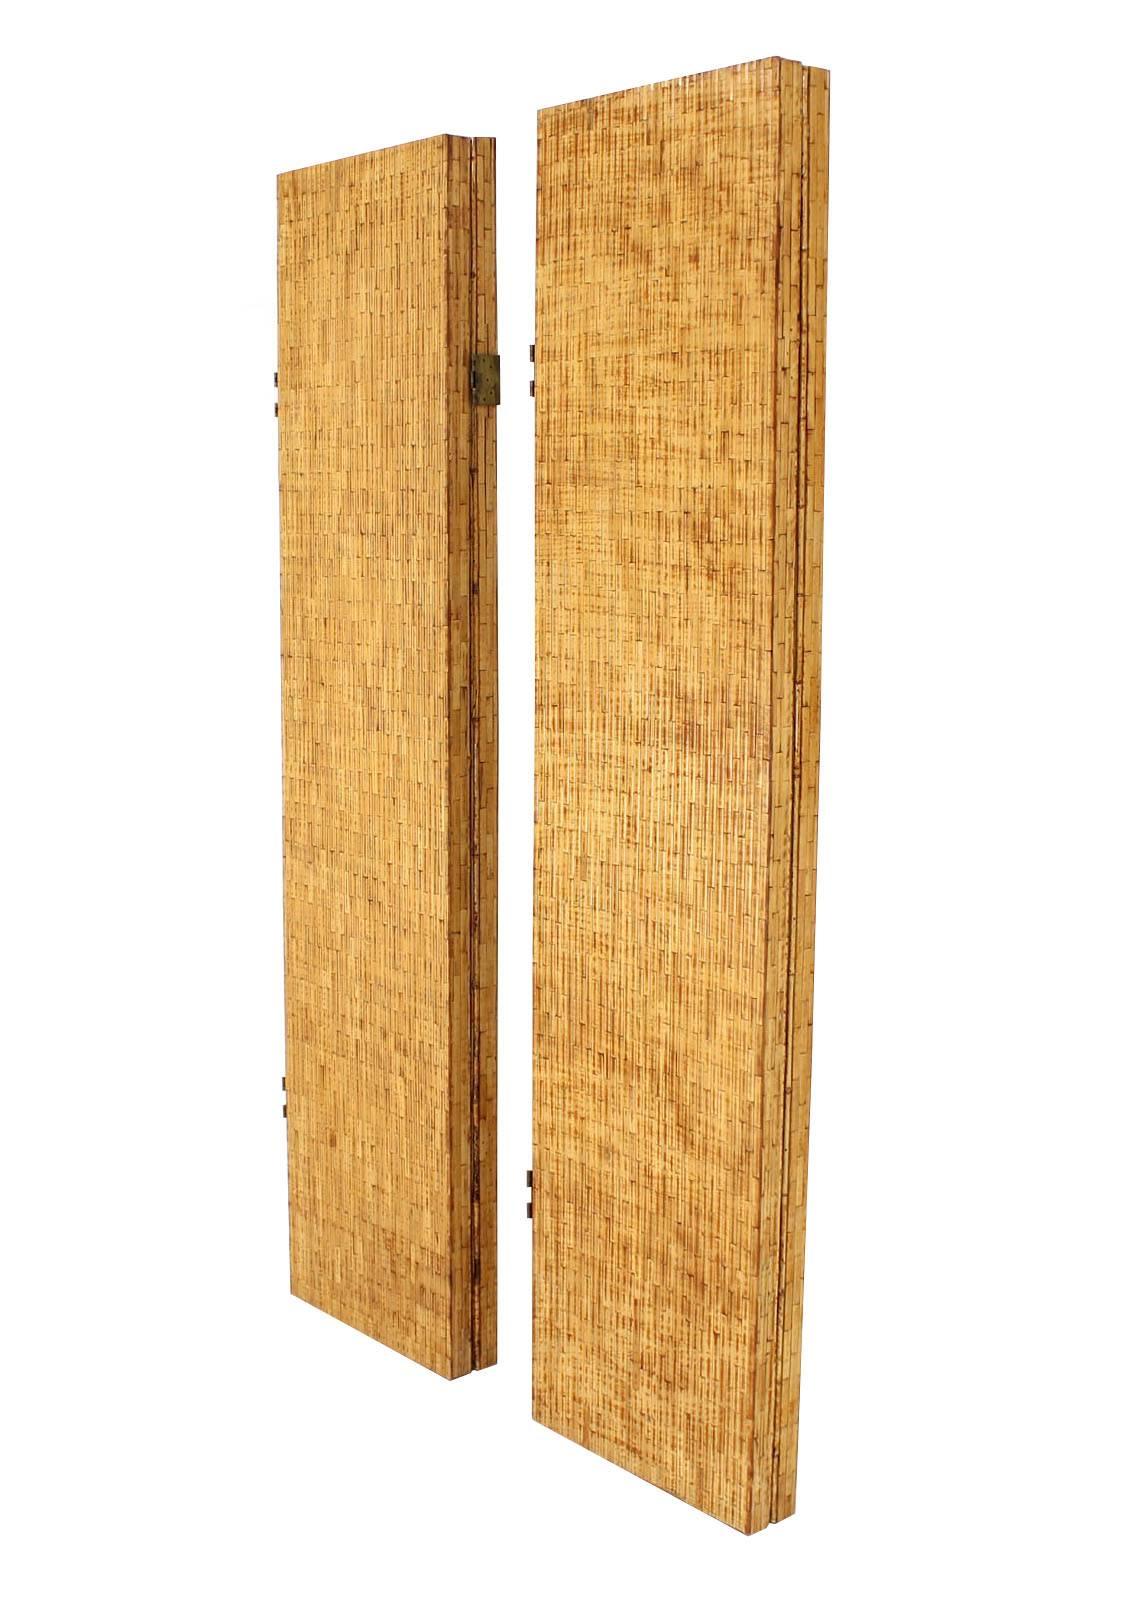 Lacquered Figural Burnt Bamboo Large Folding Screen Room Divider